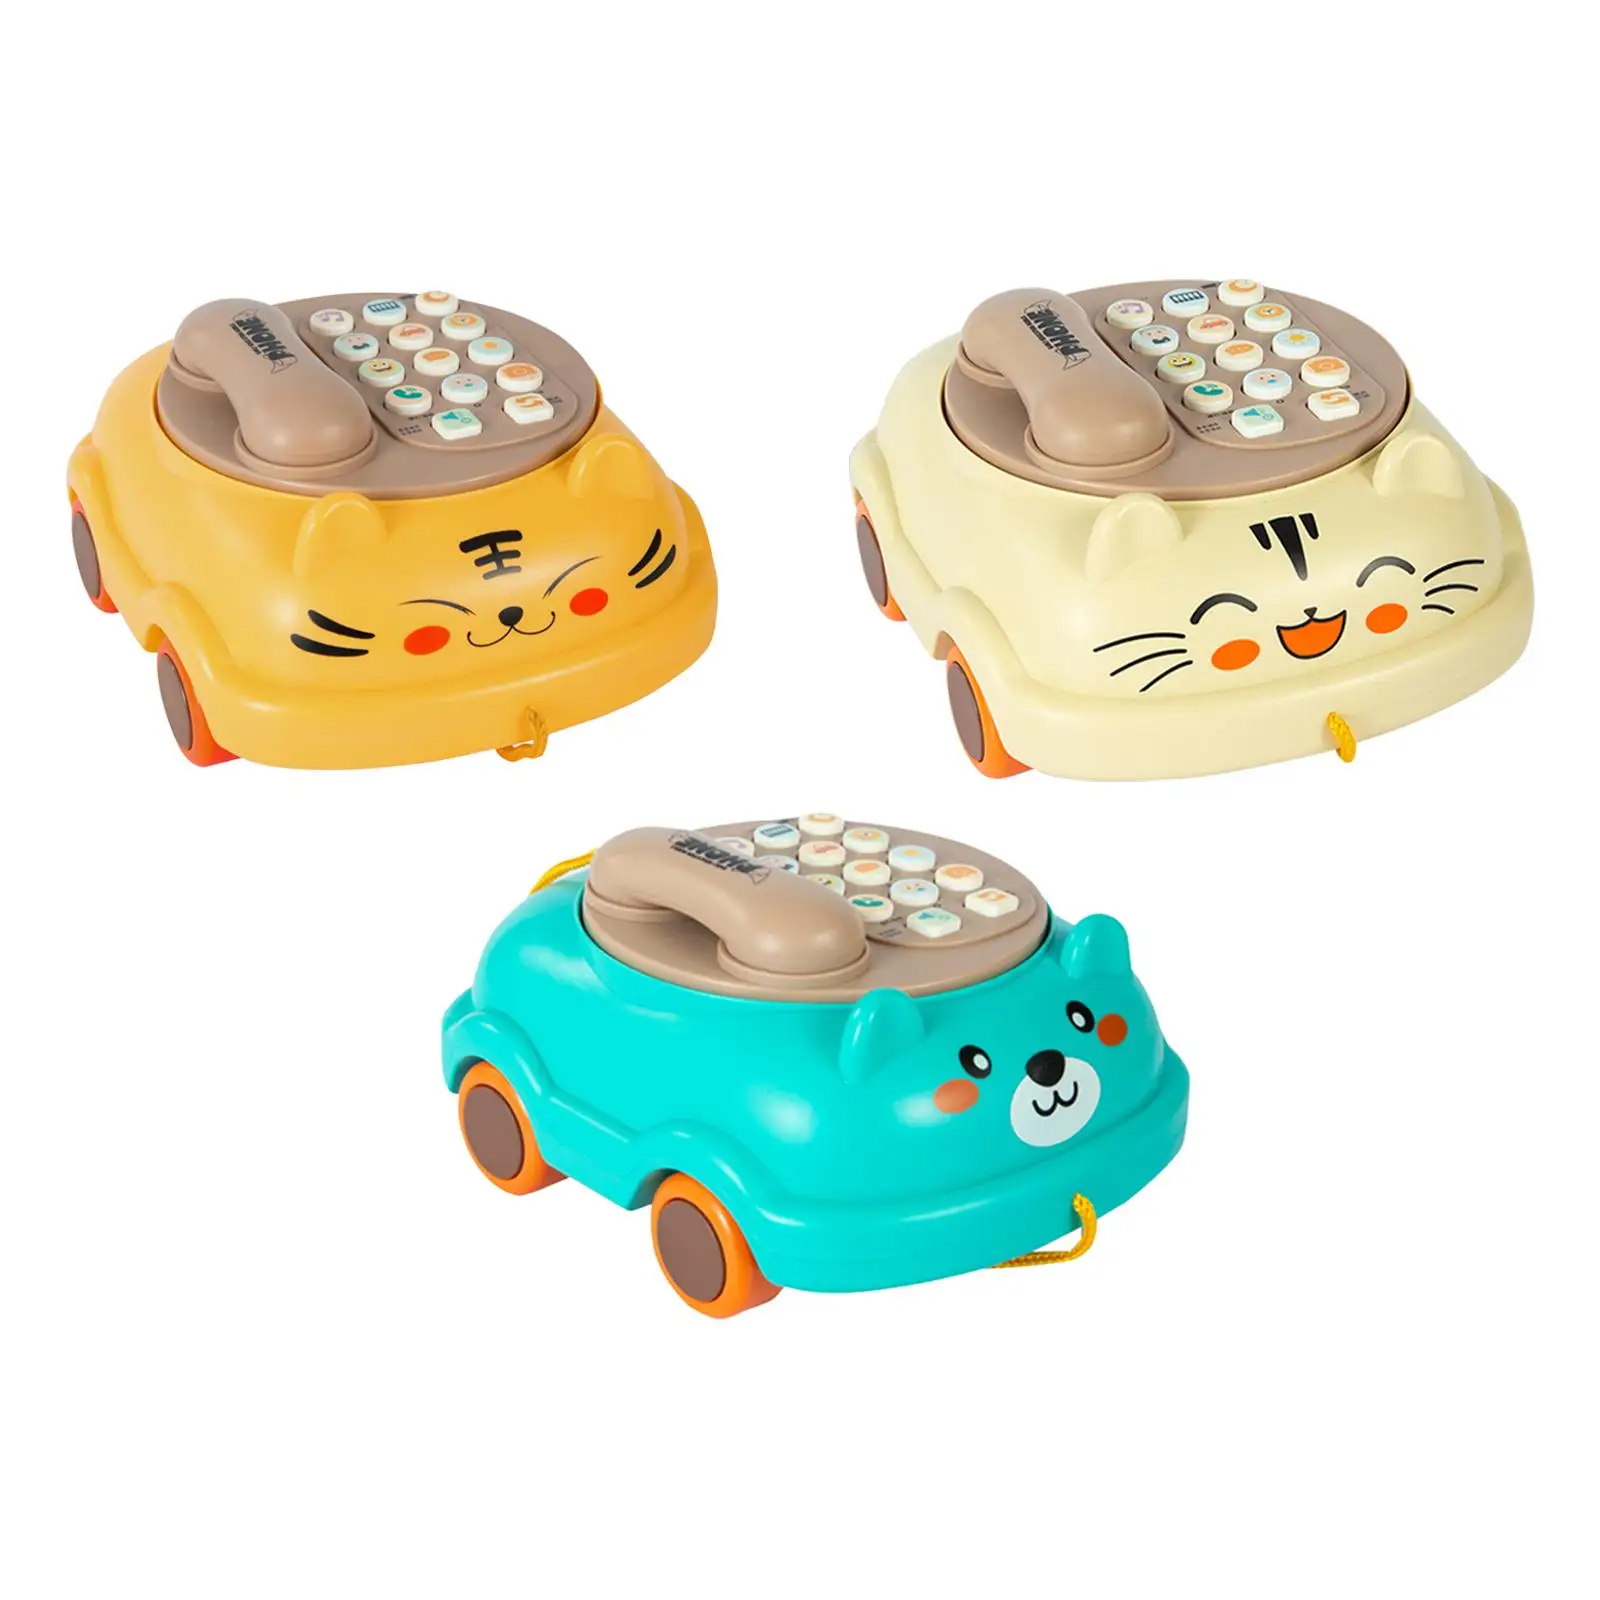 Telefone Cognitive Development Toy for Kids, Luzes, Piano, Early Learning Phones, Preschool Educational Learning, Girl